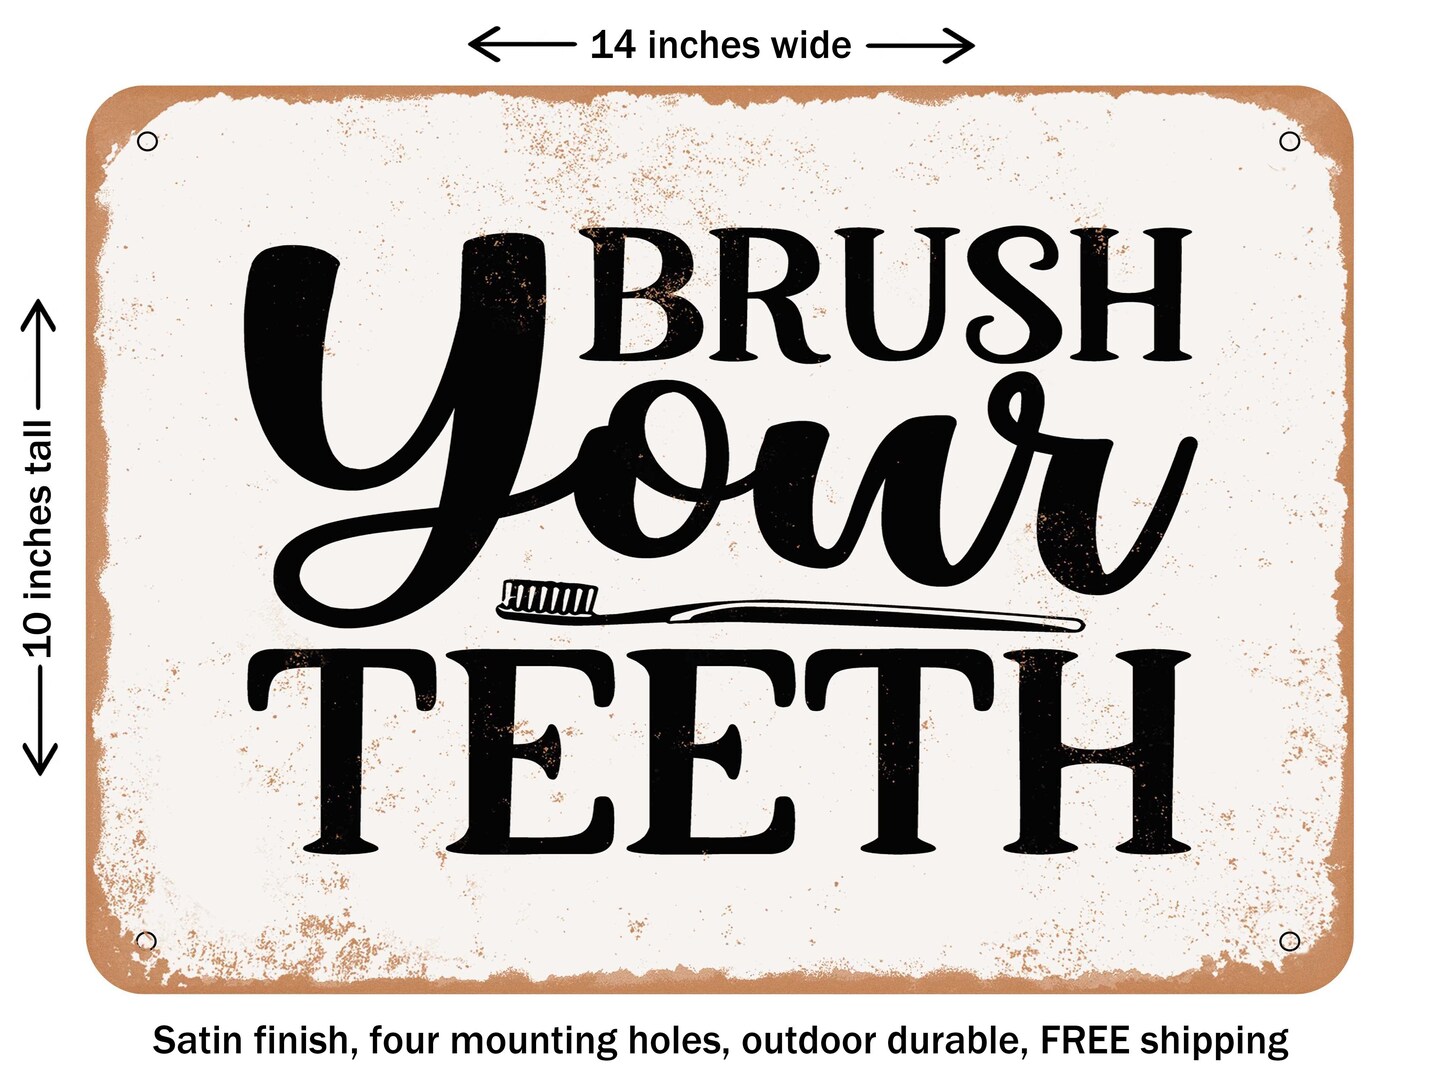 brush your teeth sign